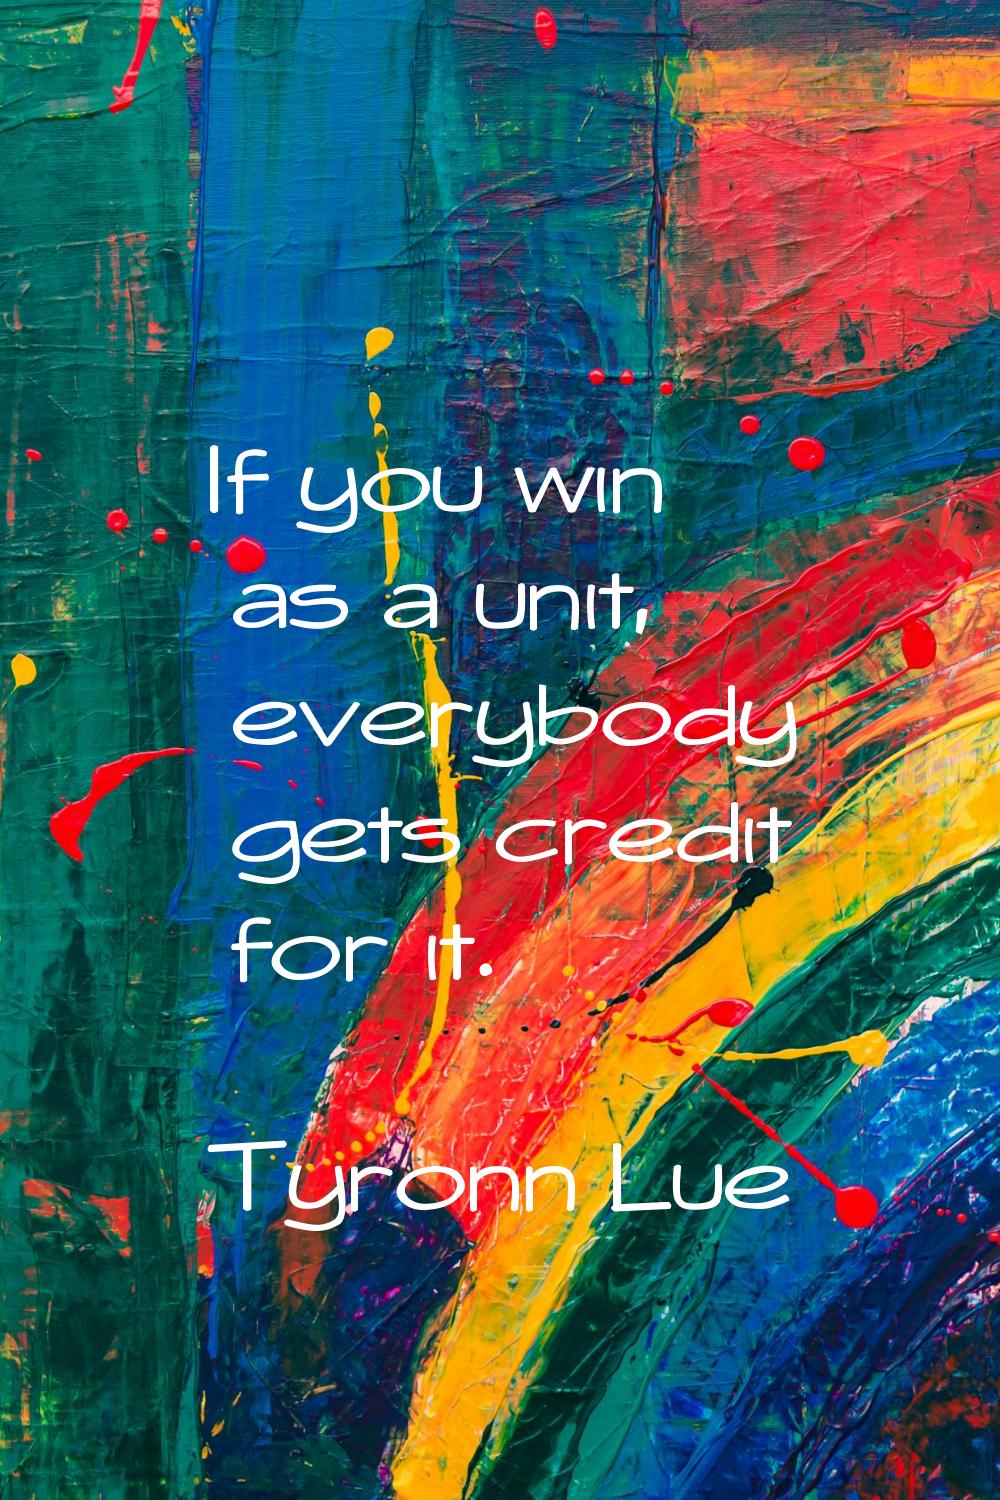 If you win as a unit, everybody gets credit for it.